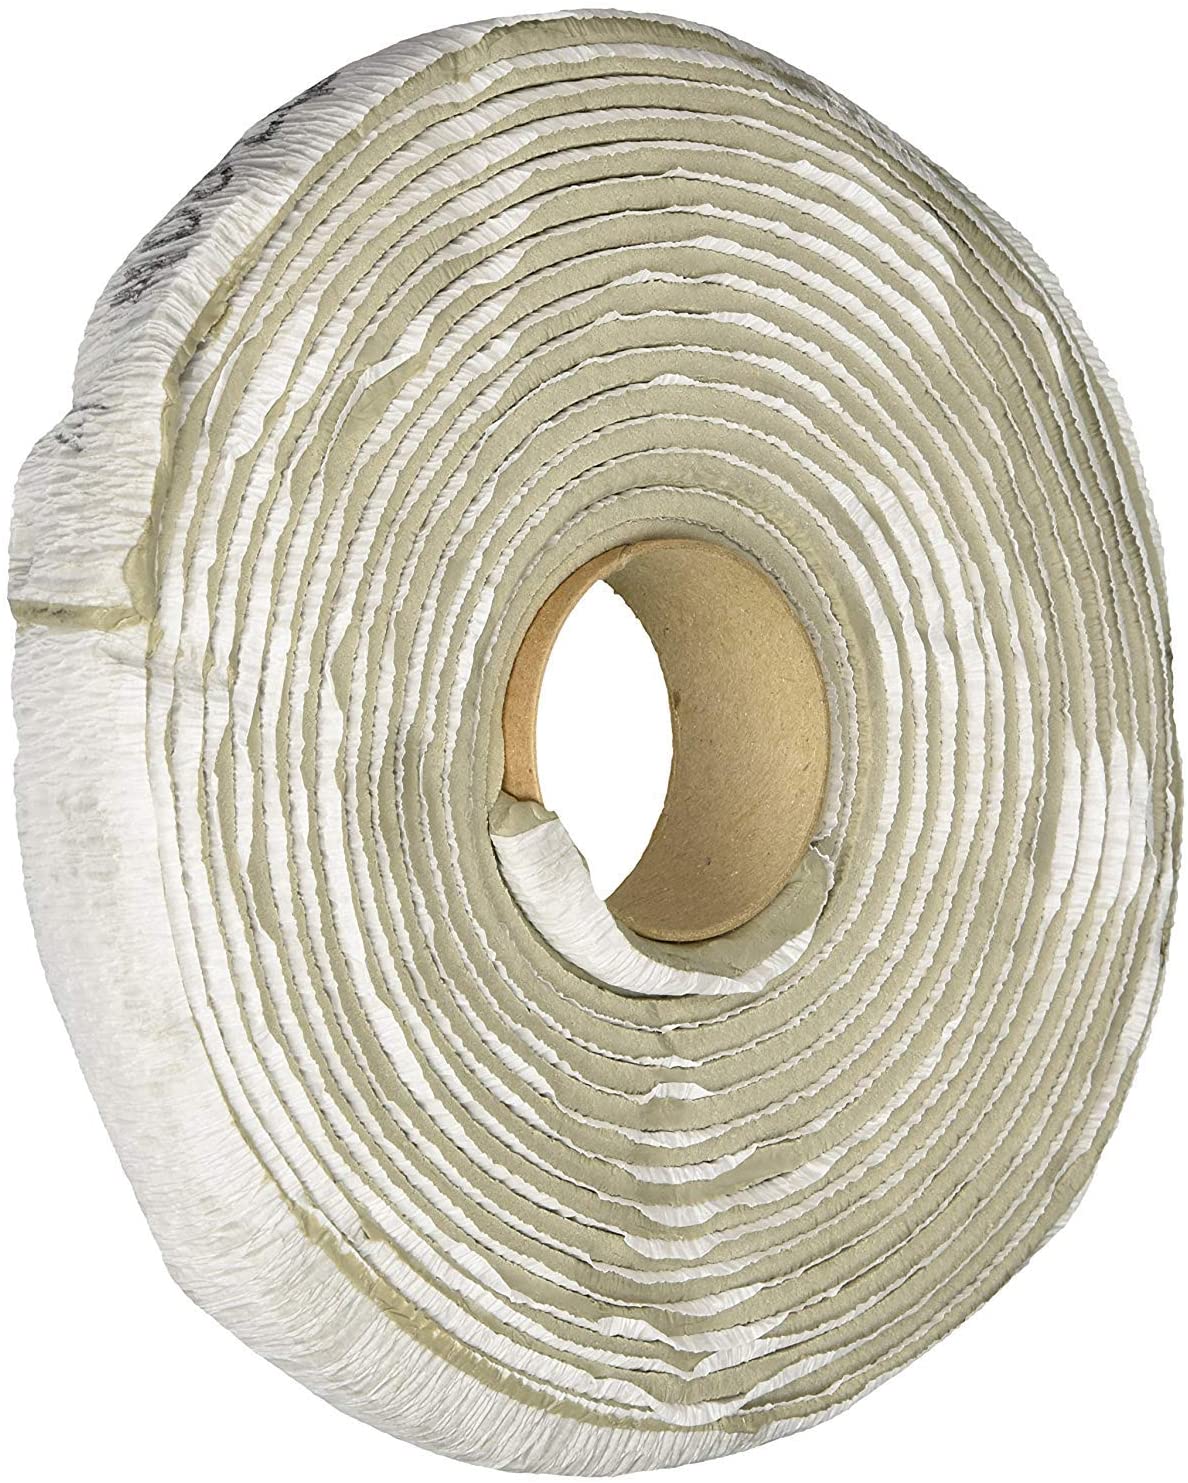 RV Wholesale Direct Heng's 16-5650 Putty Tape (3/16